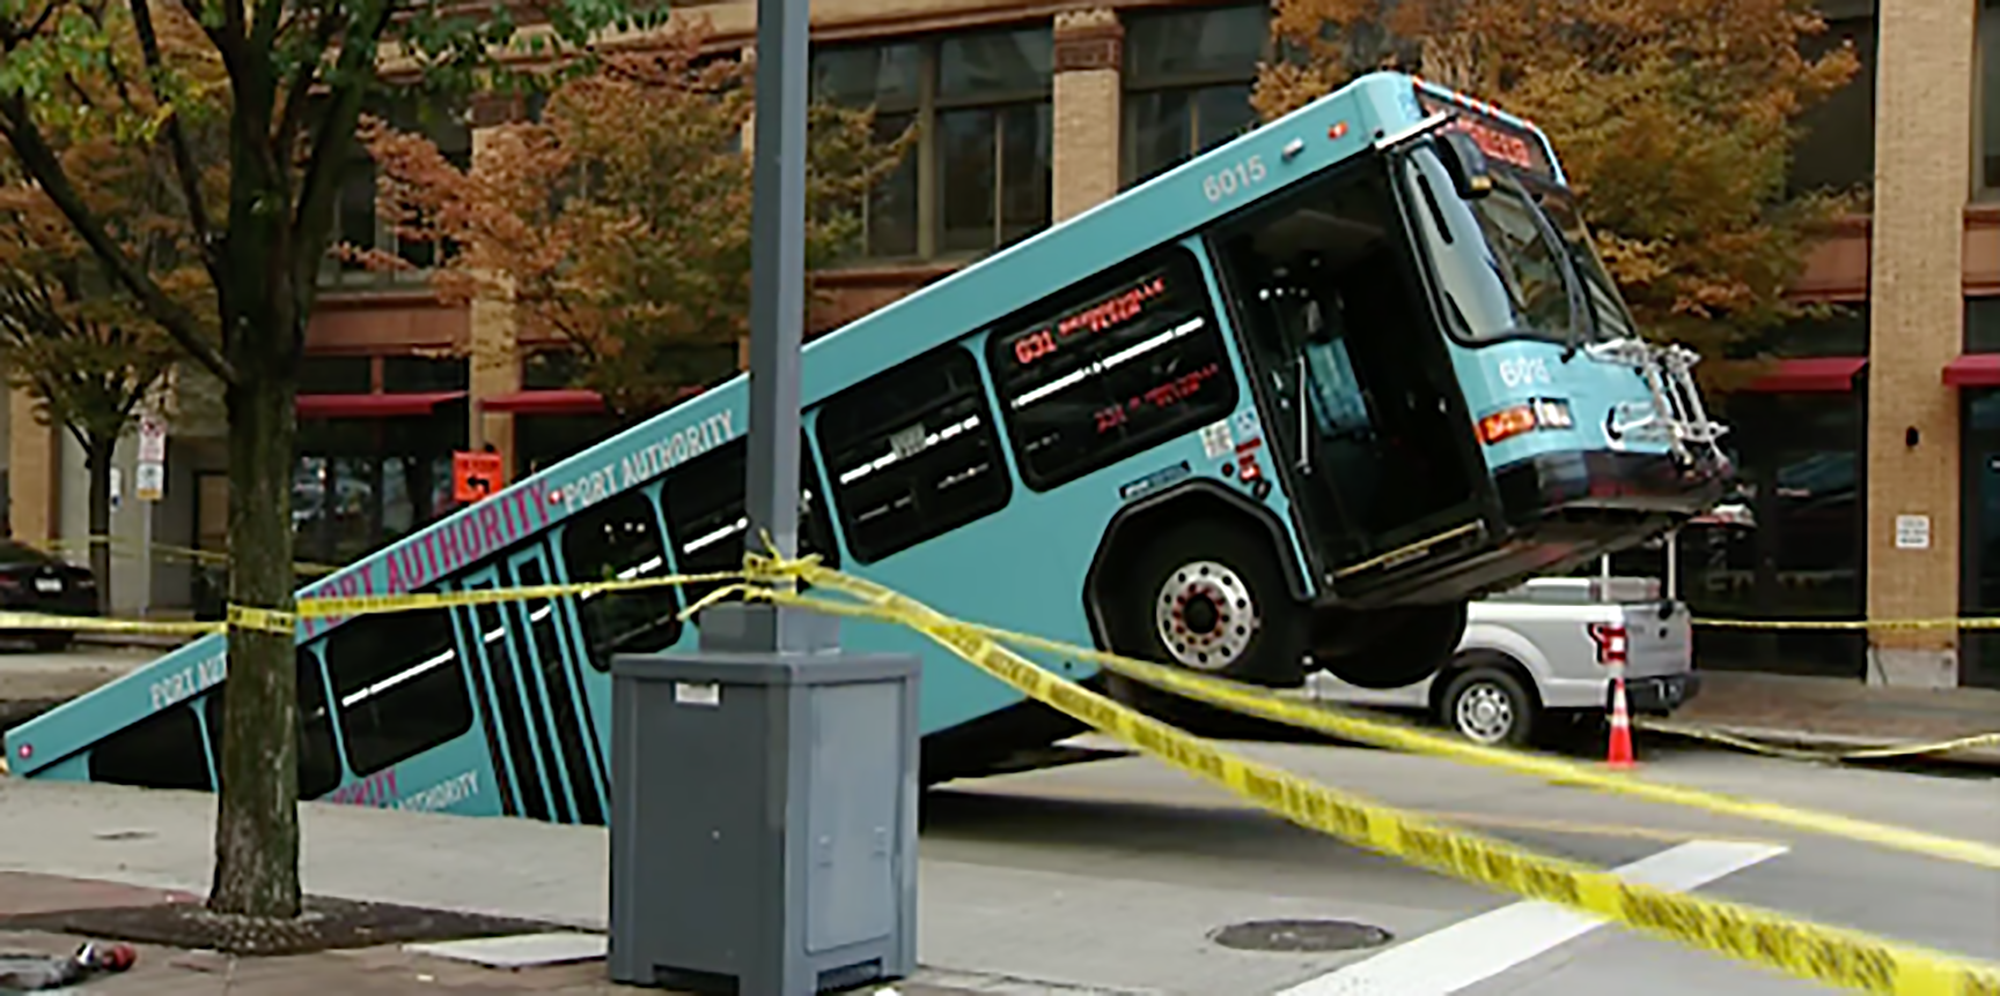 pittsburgh-bus-sink-hole.png